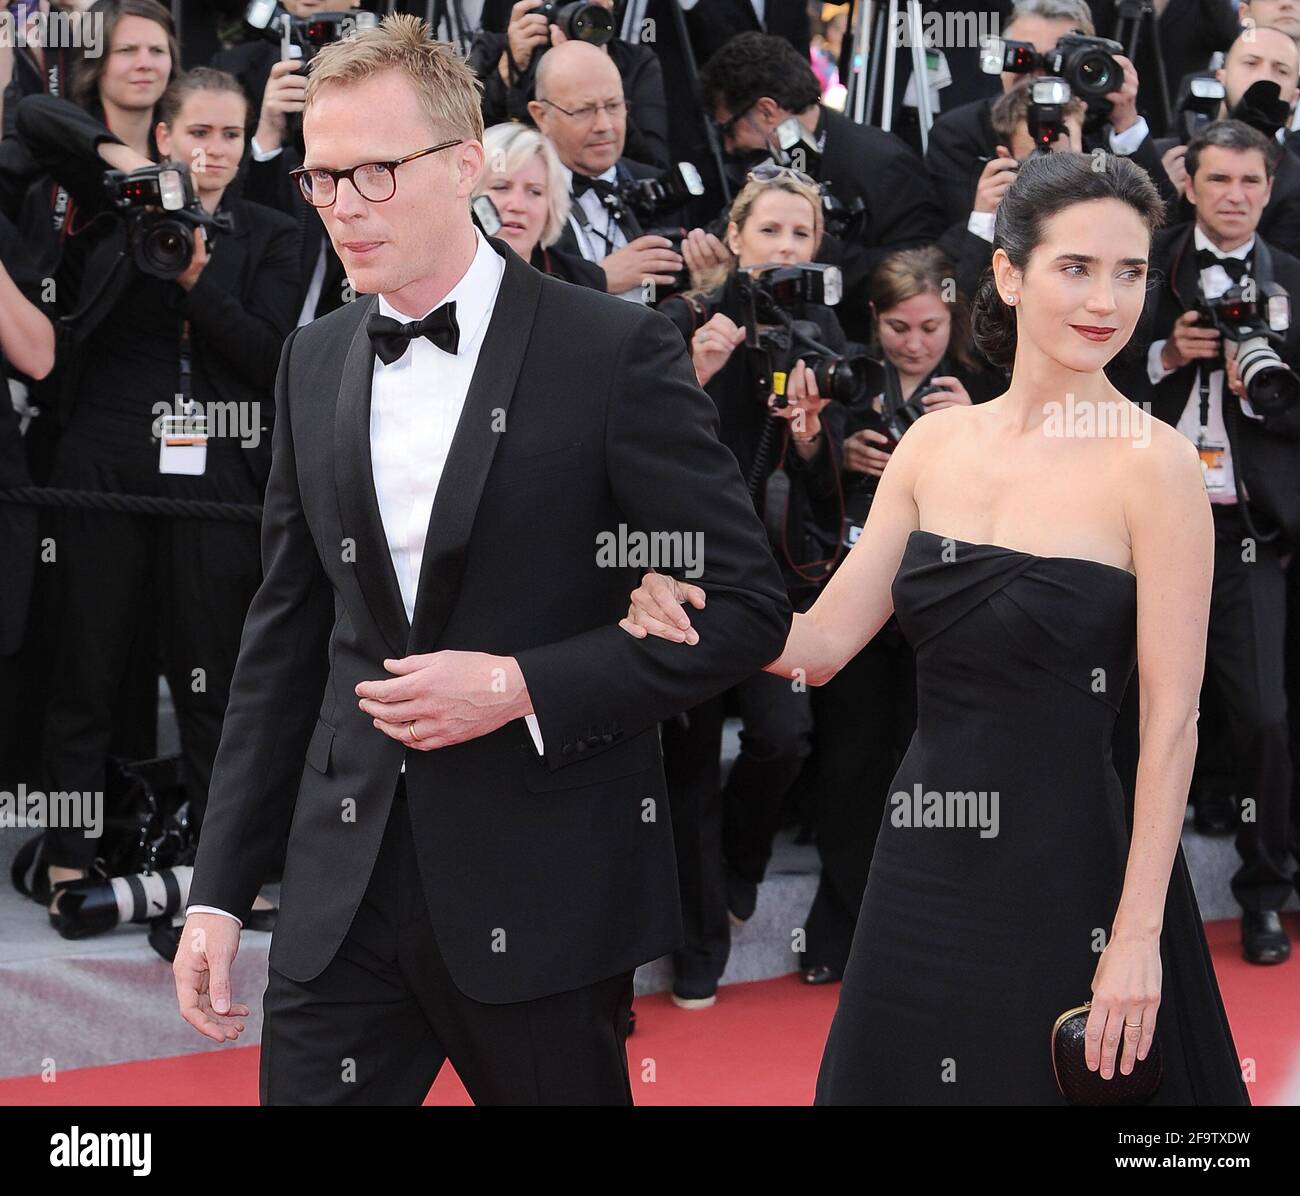 Paul Bettany Poses With Jennifer Connelly's Sons: See Rare Photos – SheKnows